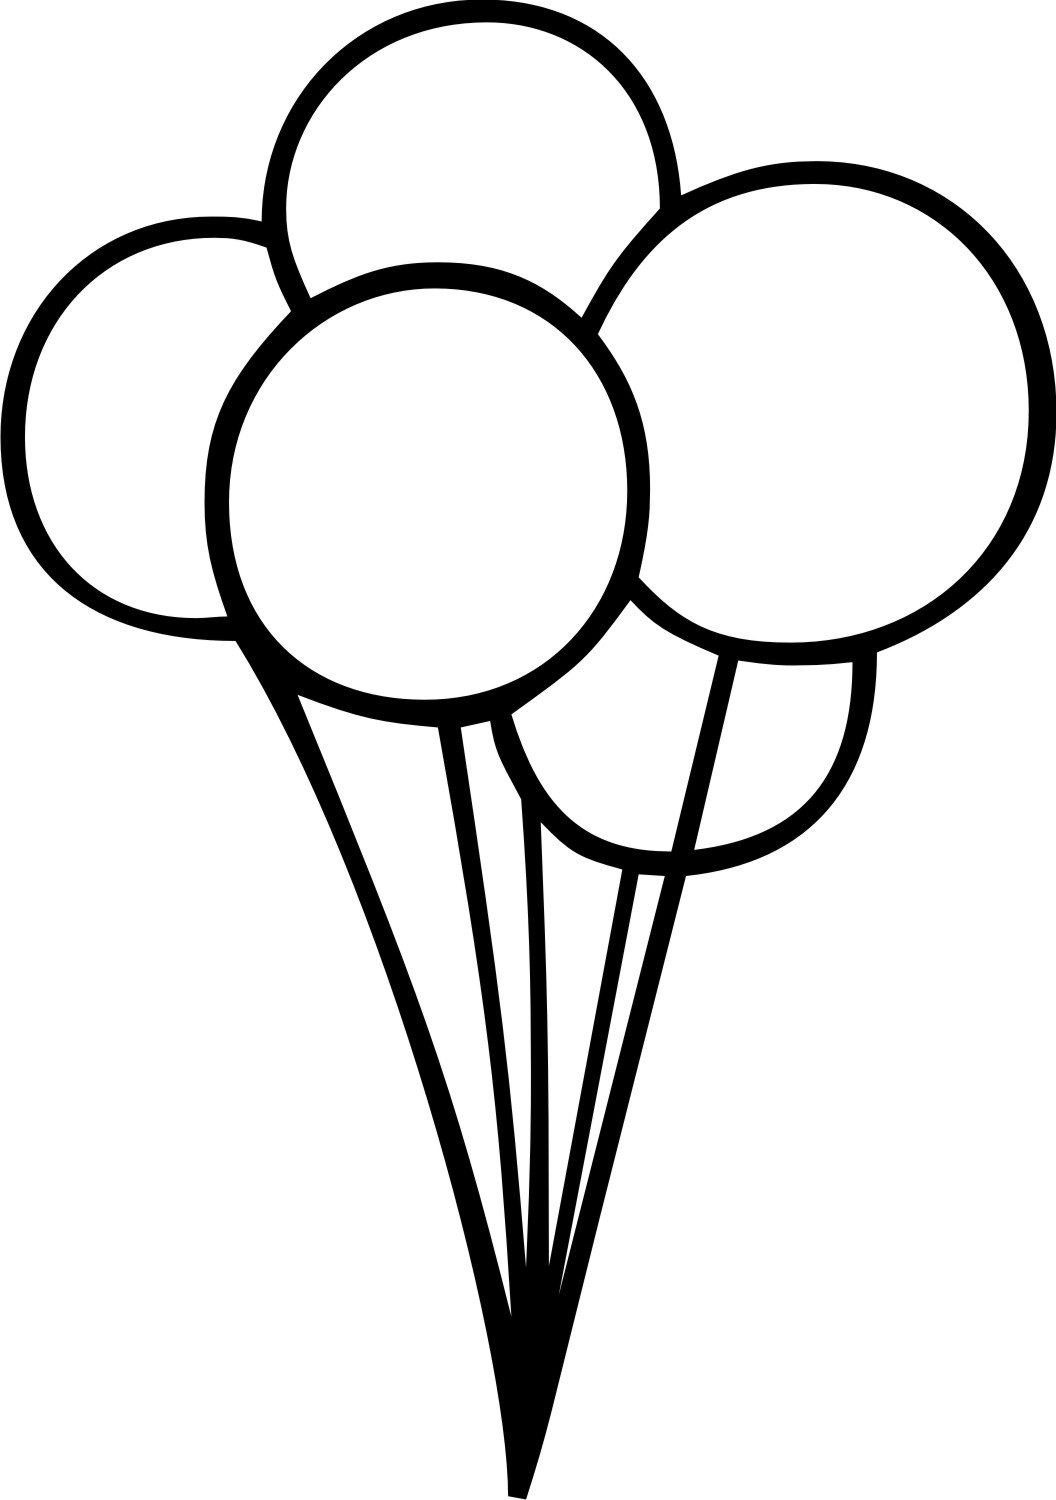 Pix For  Balloon Outline Clipart